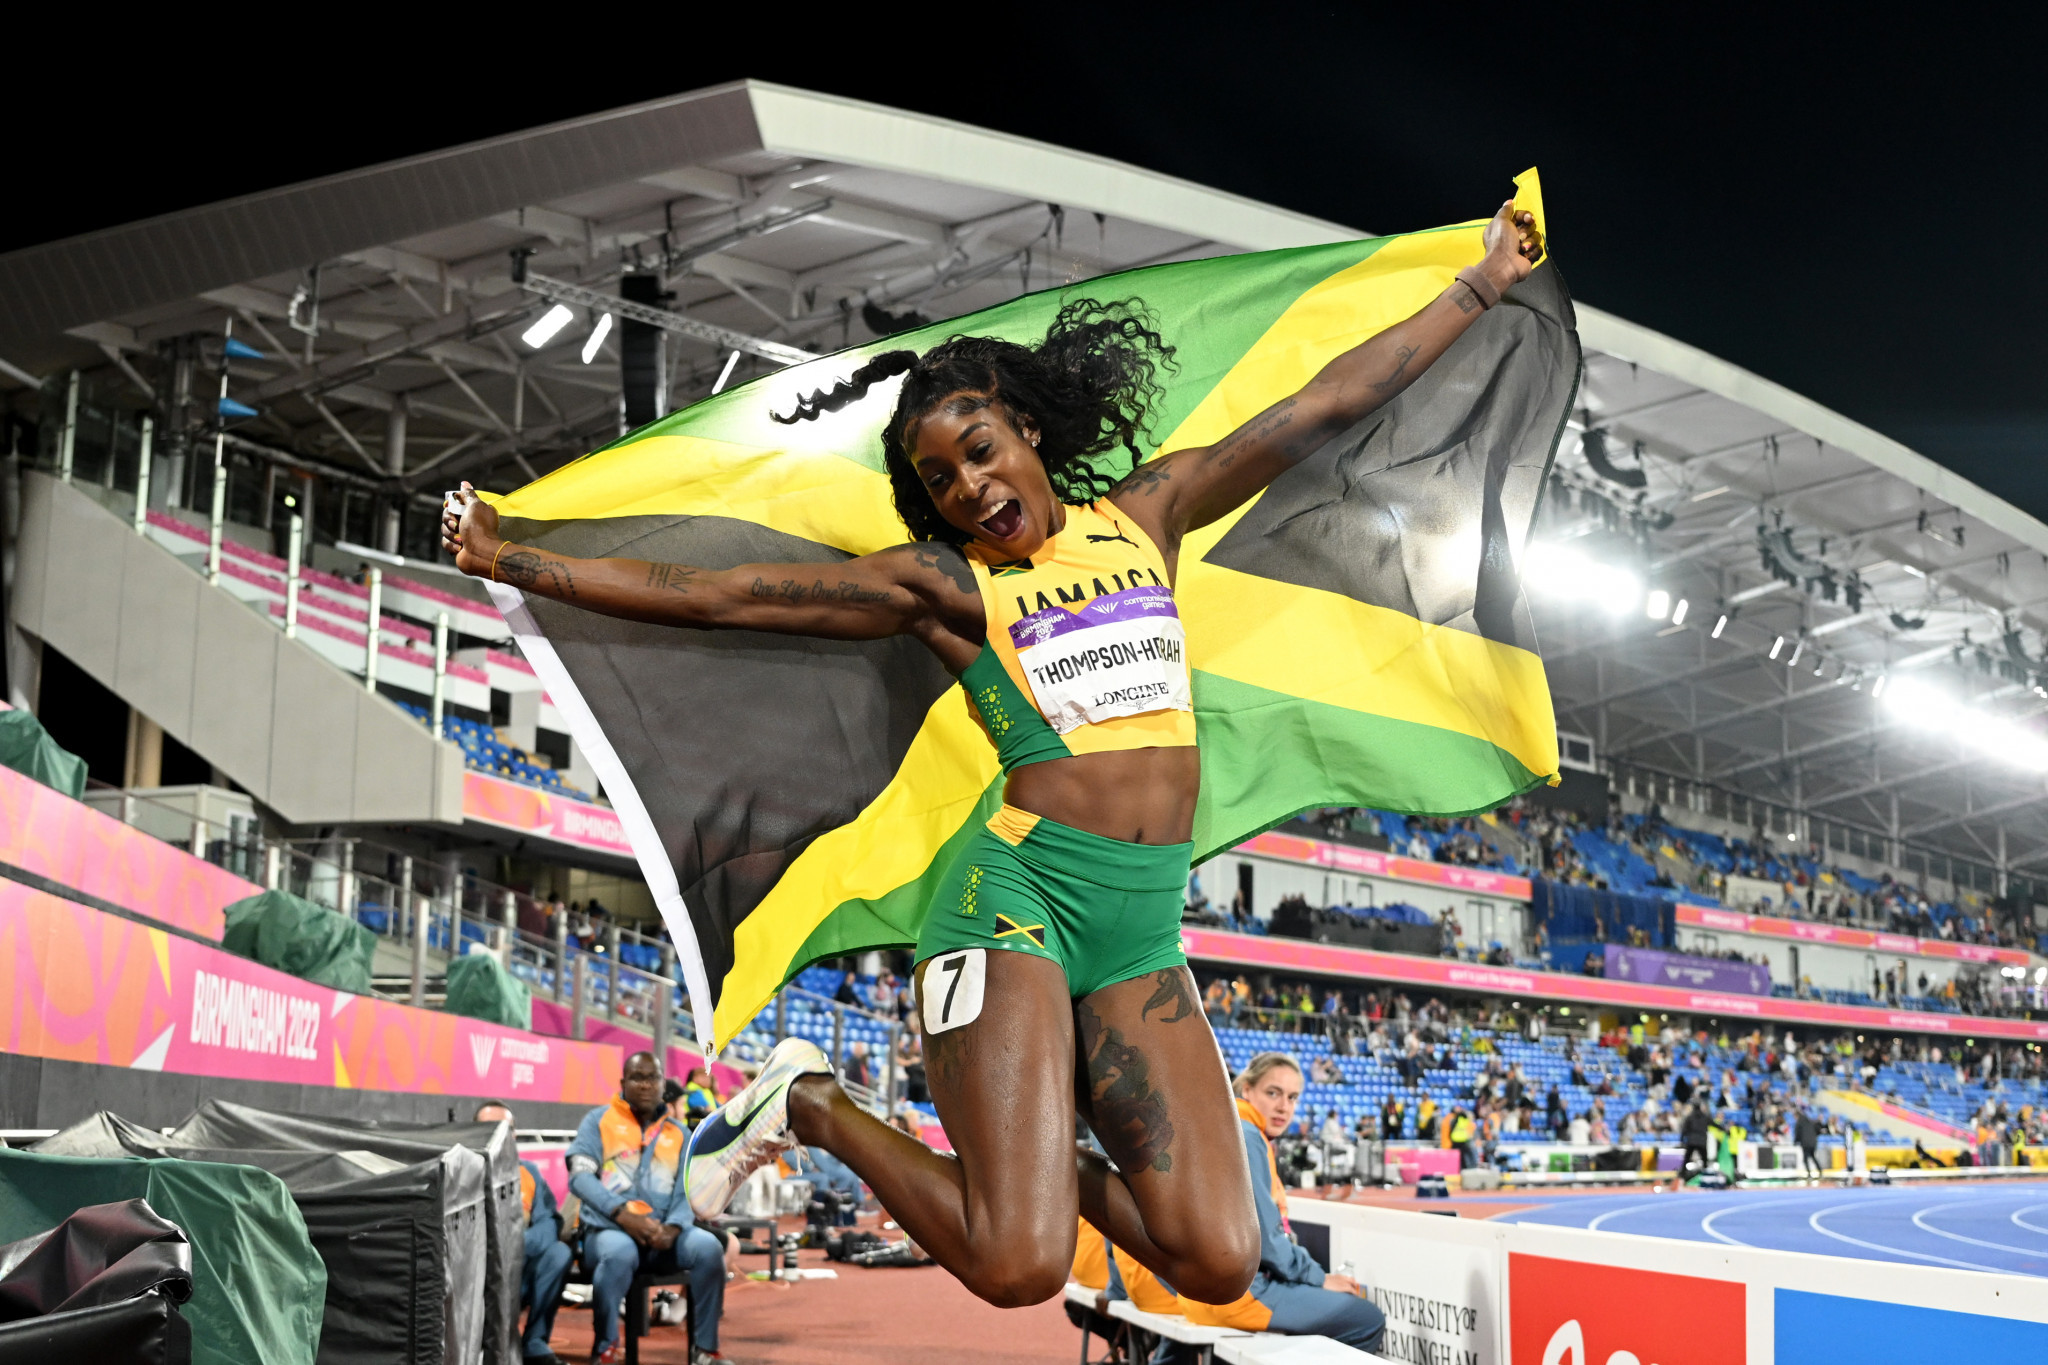 Jamaica's Elaine Thompson-Herah had merited 751 articles, the second highest, in 2022 ©Getty Images